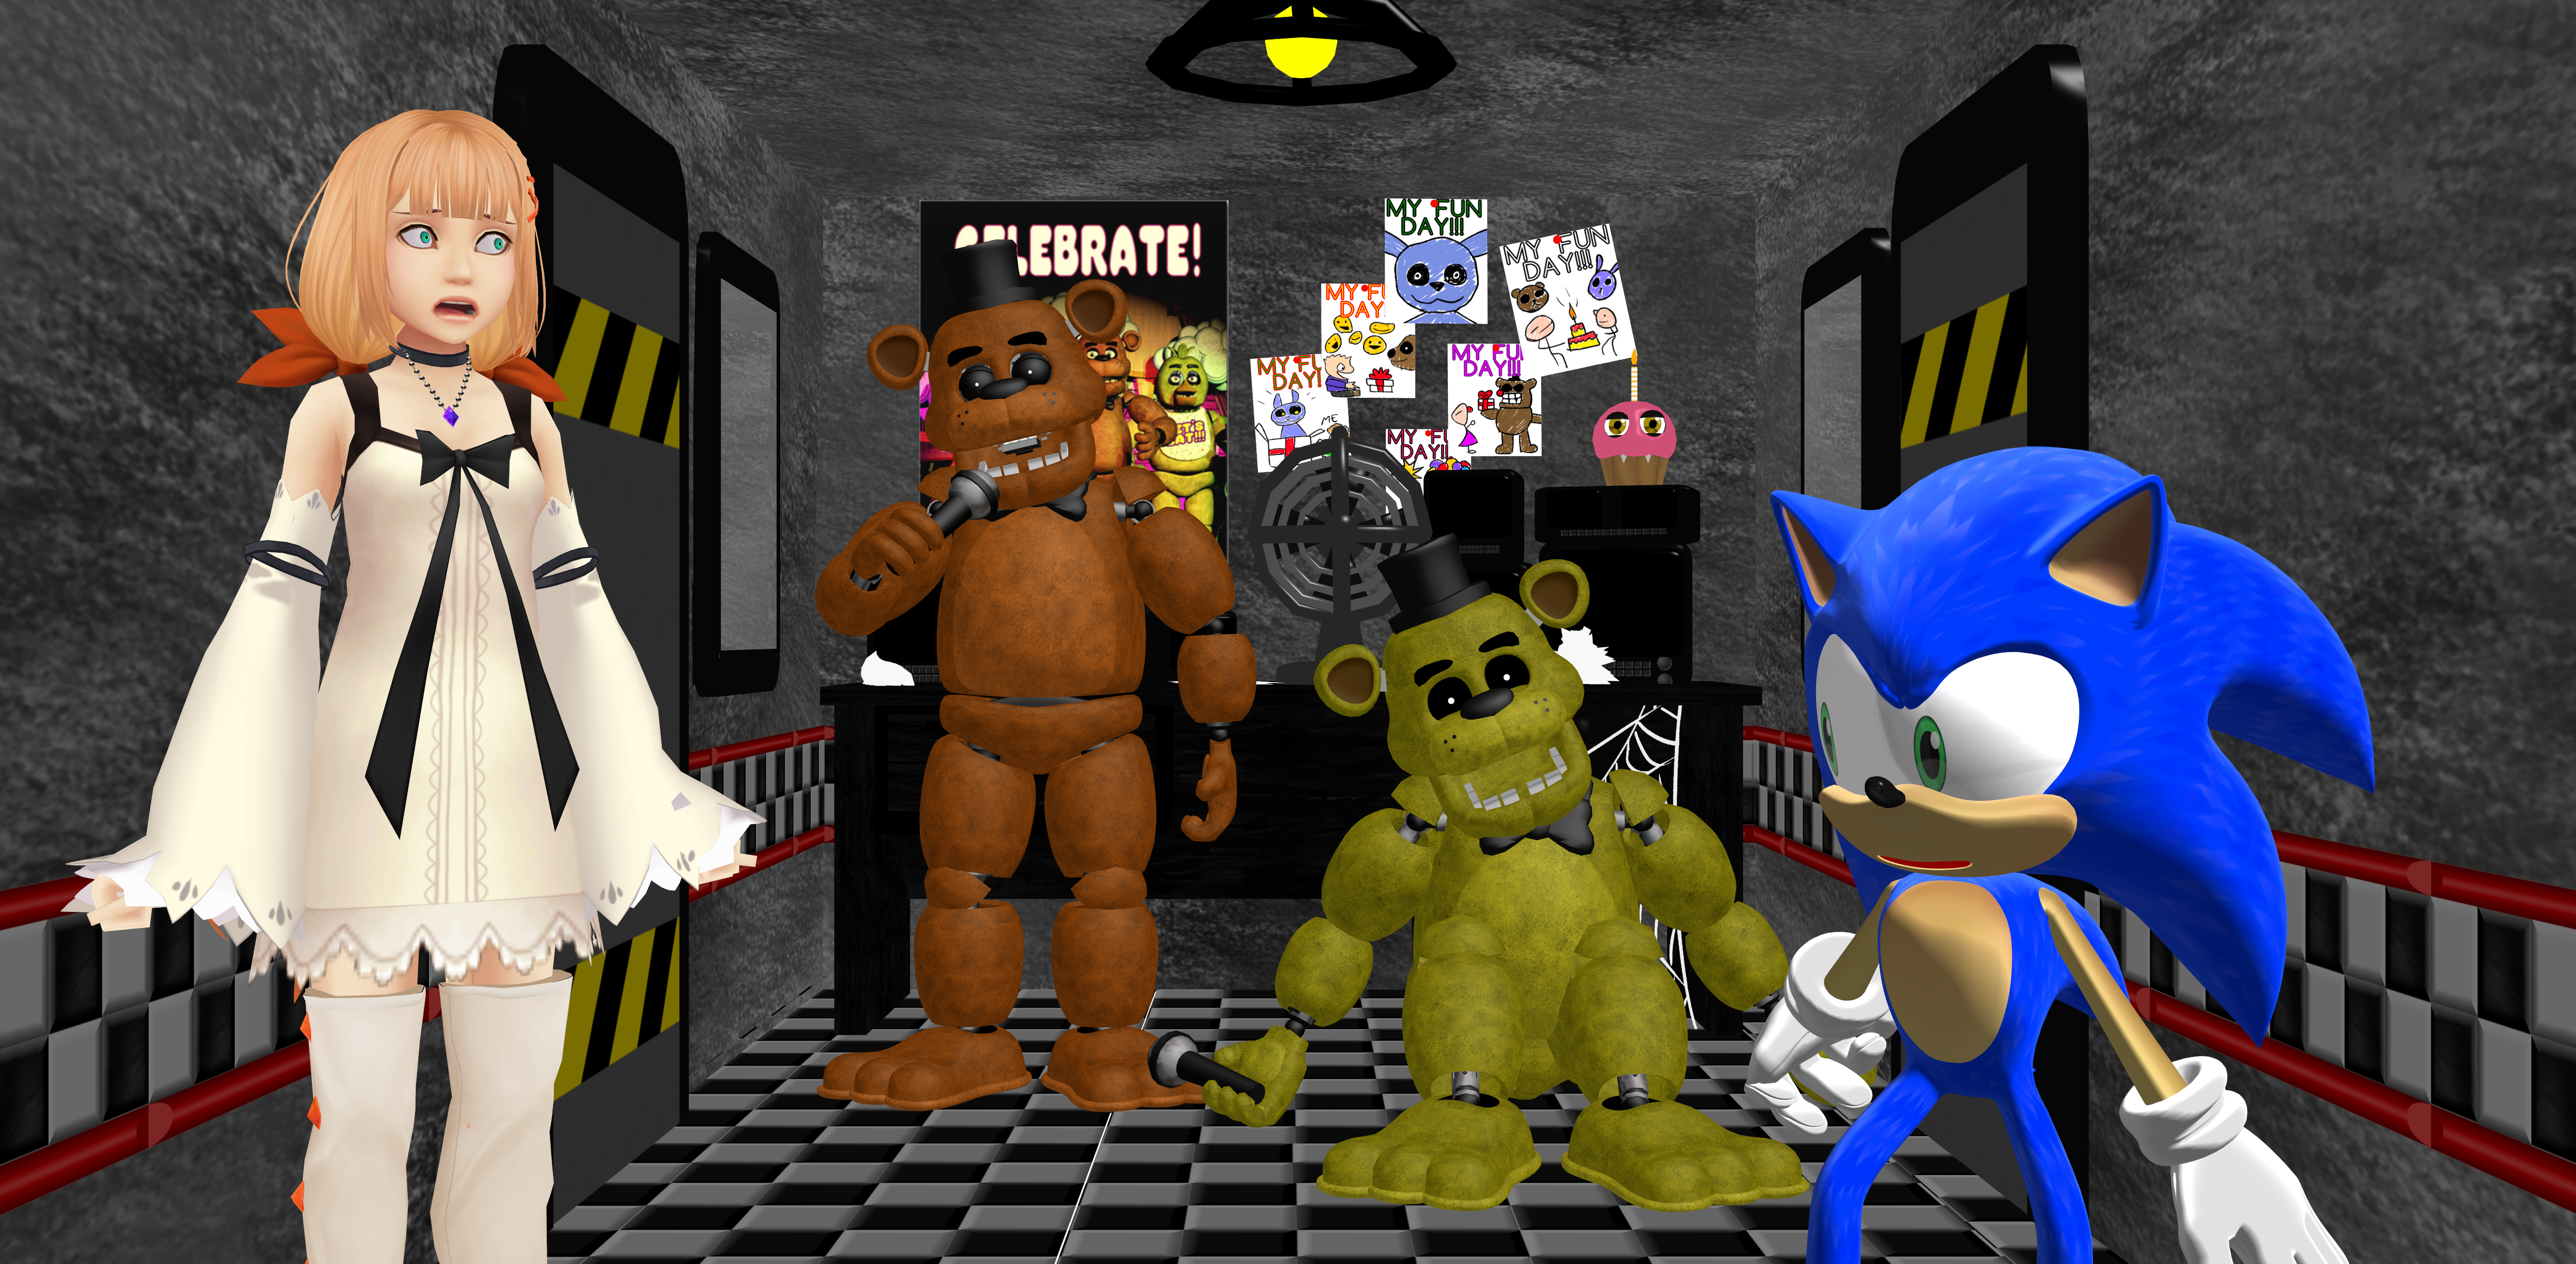 Five Nights At Freddy's 2 Five Nights At Freddy's 3 Animatronics Toy PNG,  Clipart, Free PNG